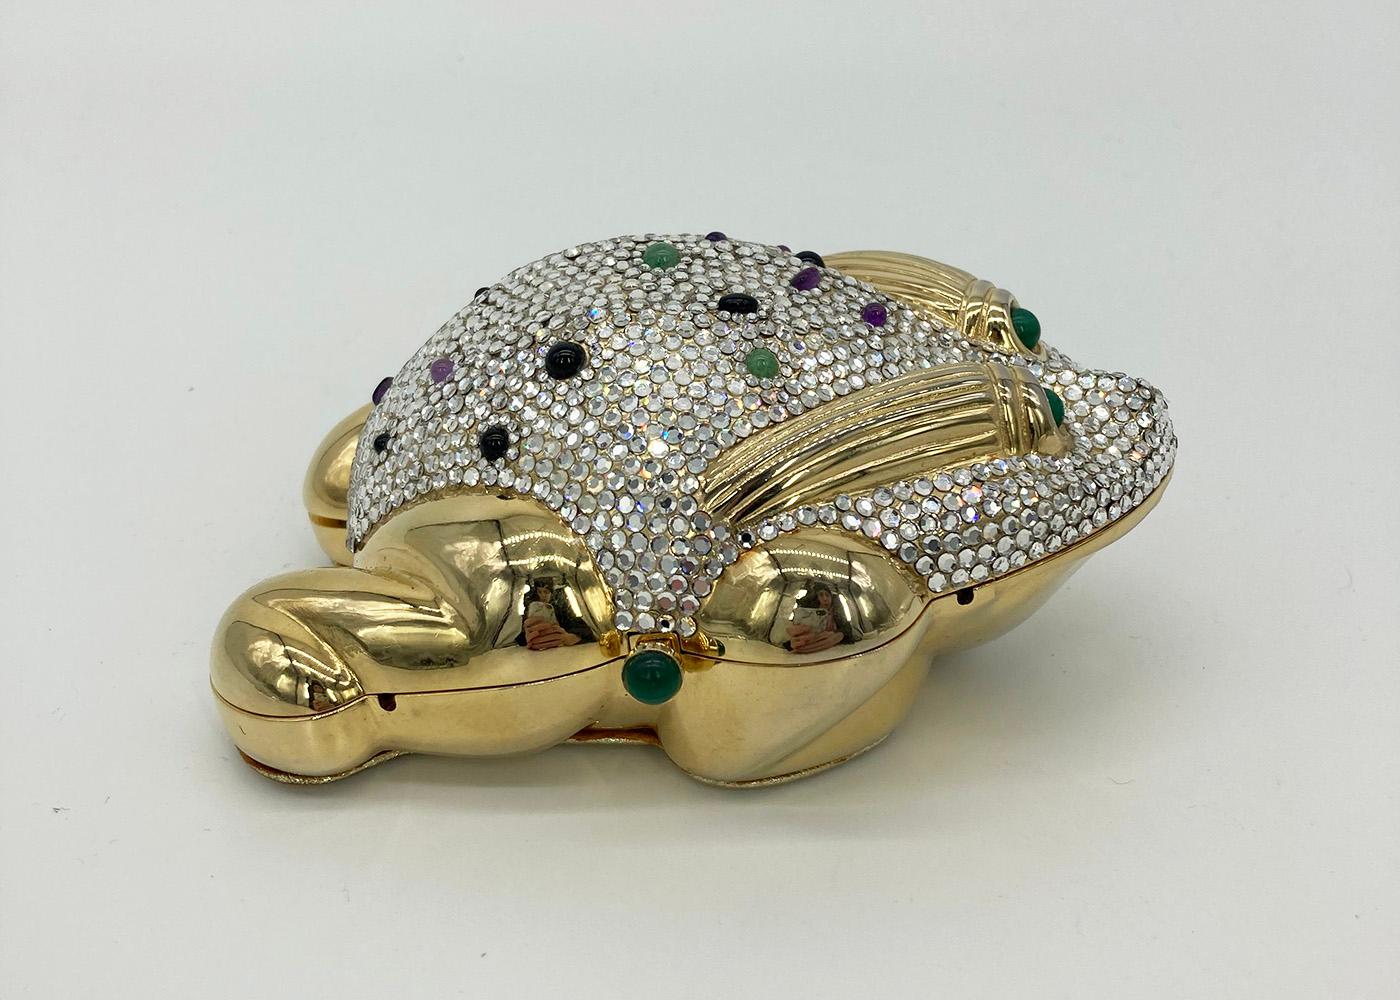 ADORABLE JUDITH LEIBER gold frog minaudiere in excellent condition.  Gold frog exterior with clear silver swarovski crystal body with multi color precious gemstones throughout.  Solid gold legs, bottom half and eyes. gold leather base. Side button